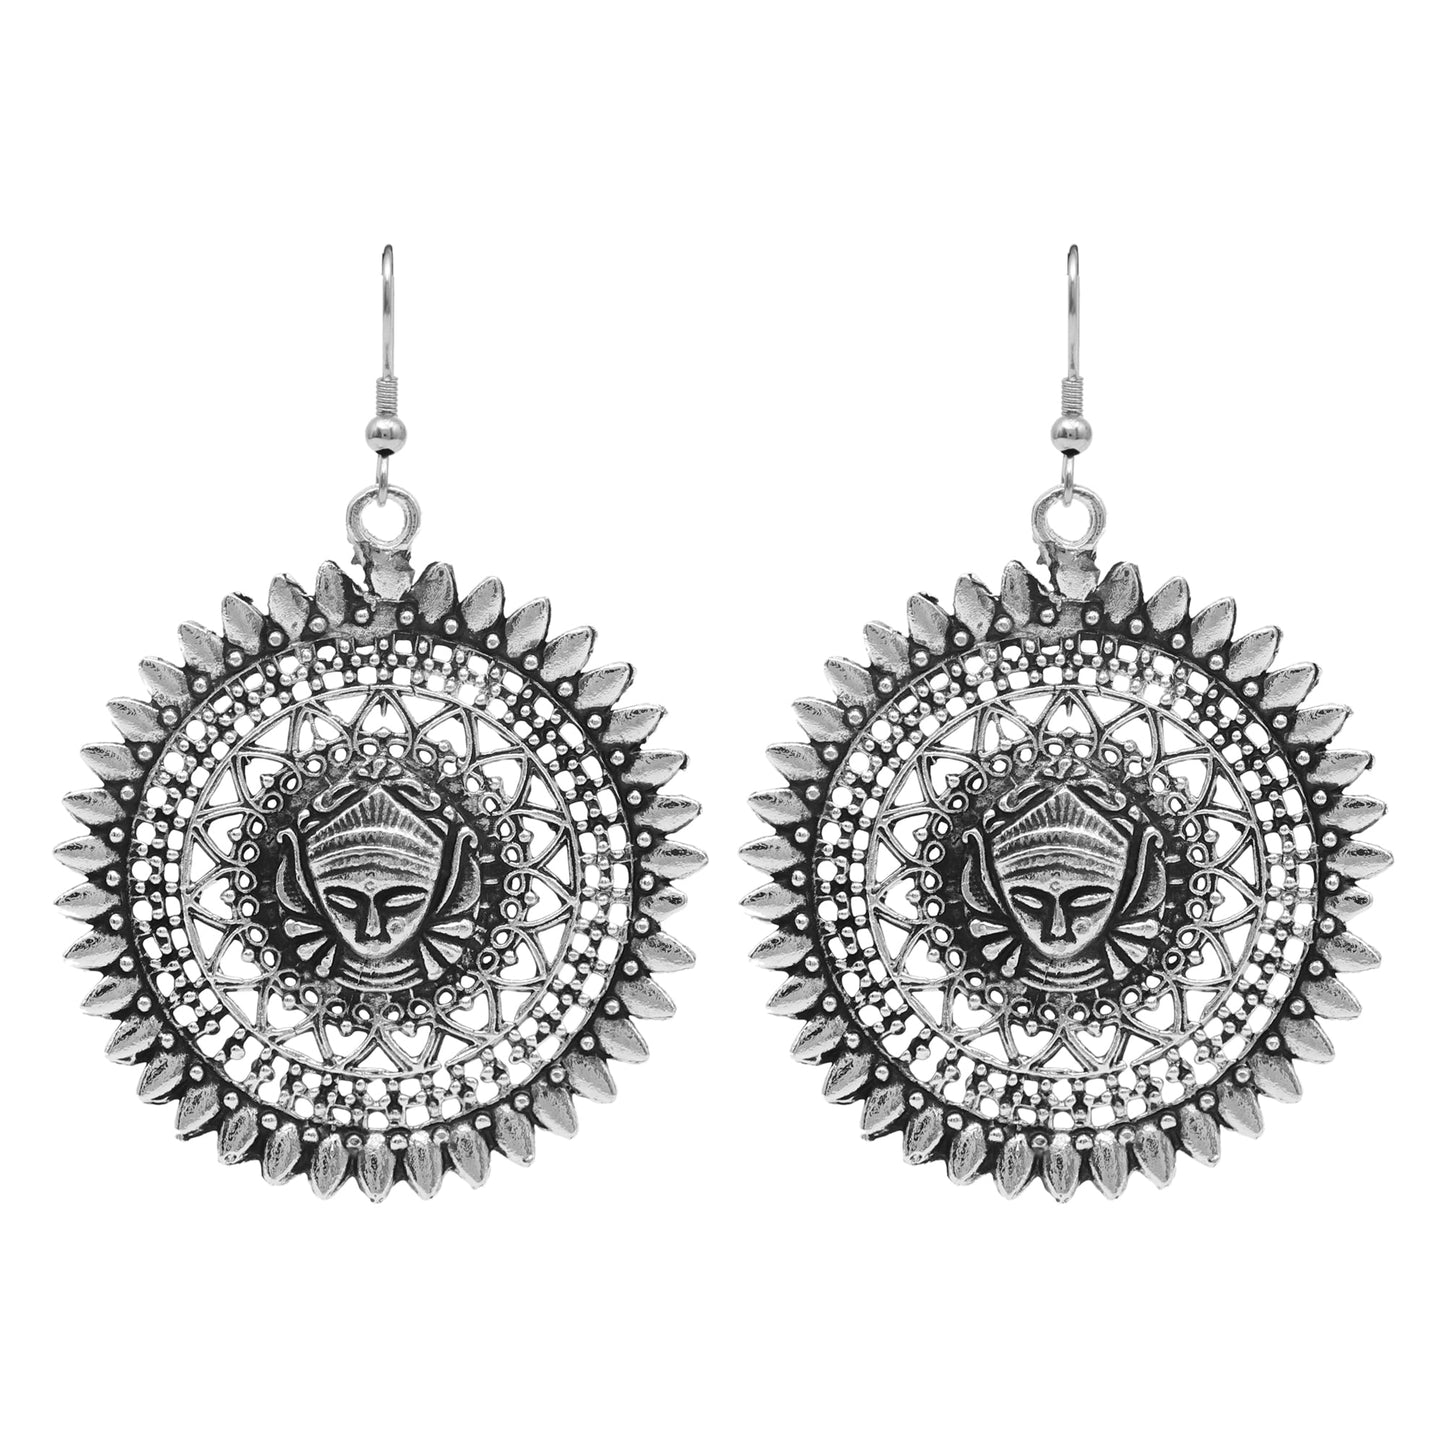 Oxidised Black Silver Lord Buddha Temple Stylish Hoop and Bali Earring for Girls and Women (SJ_1729)